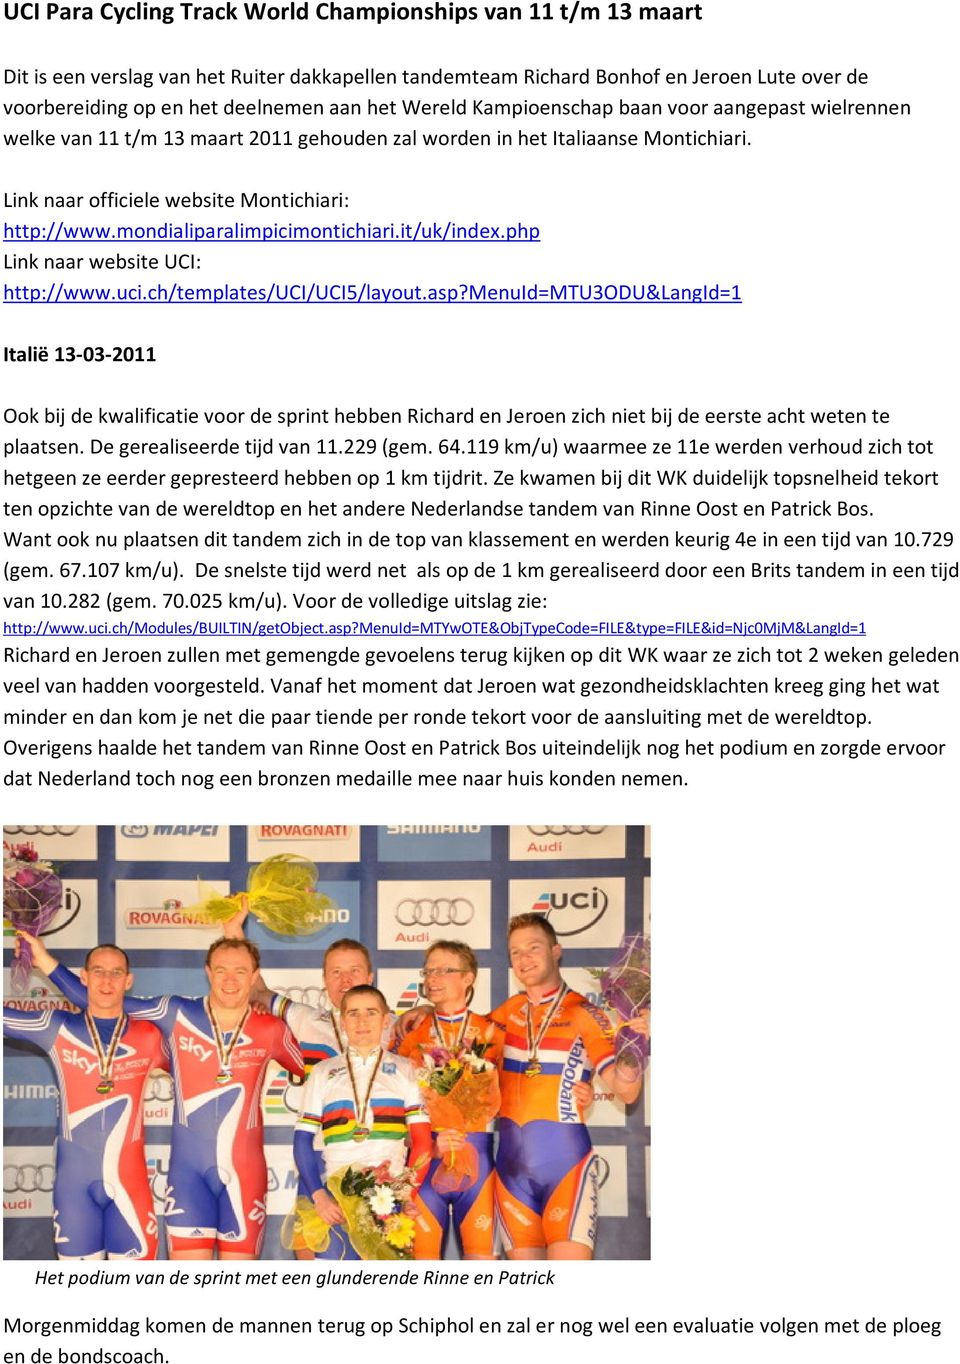 mondialiparalimpicimontichiari.it/uk/index.php Link naar website UCI: http://www.uci.ch/templates/uci/uci5/layout.asp?